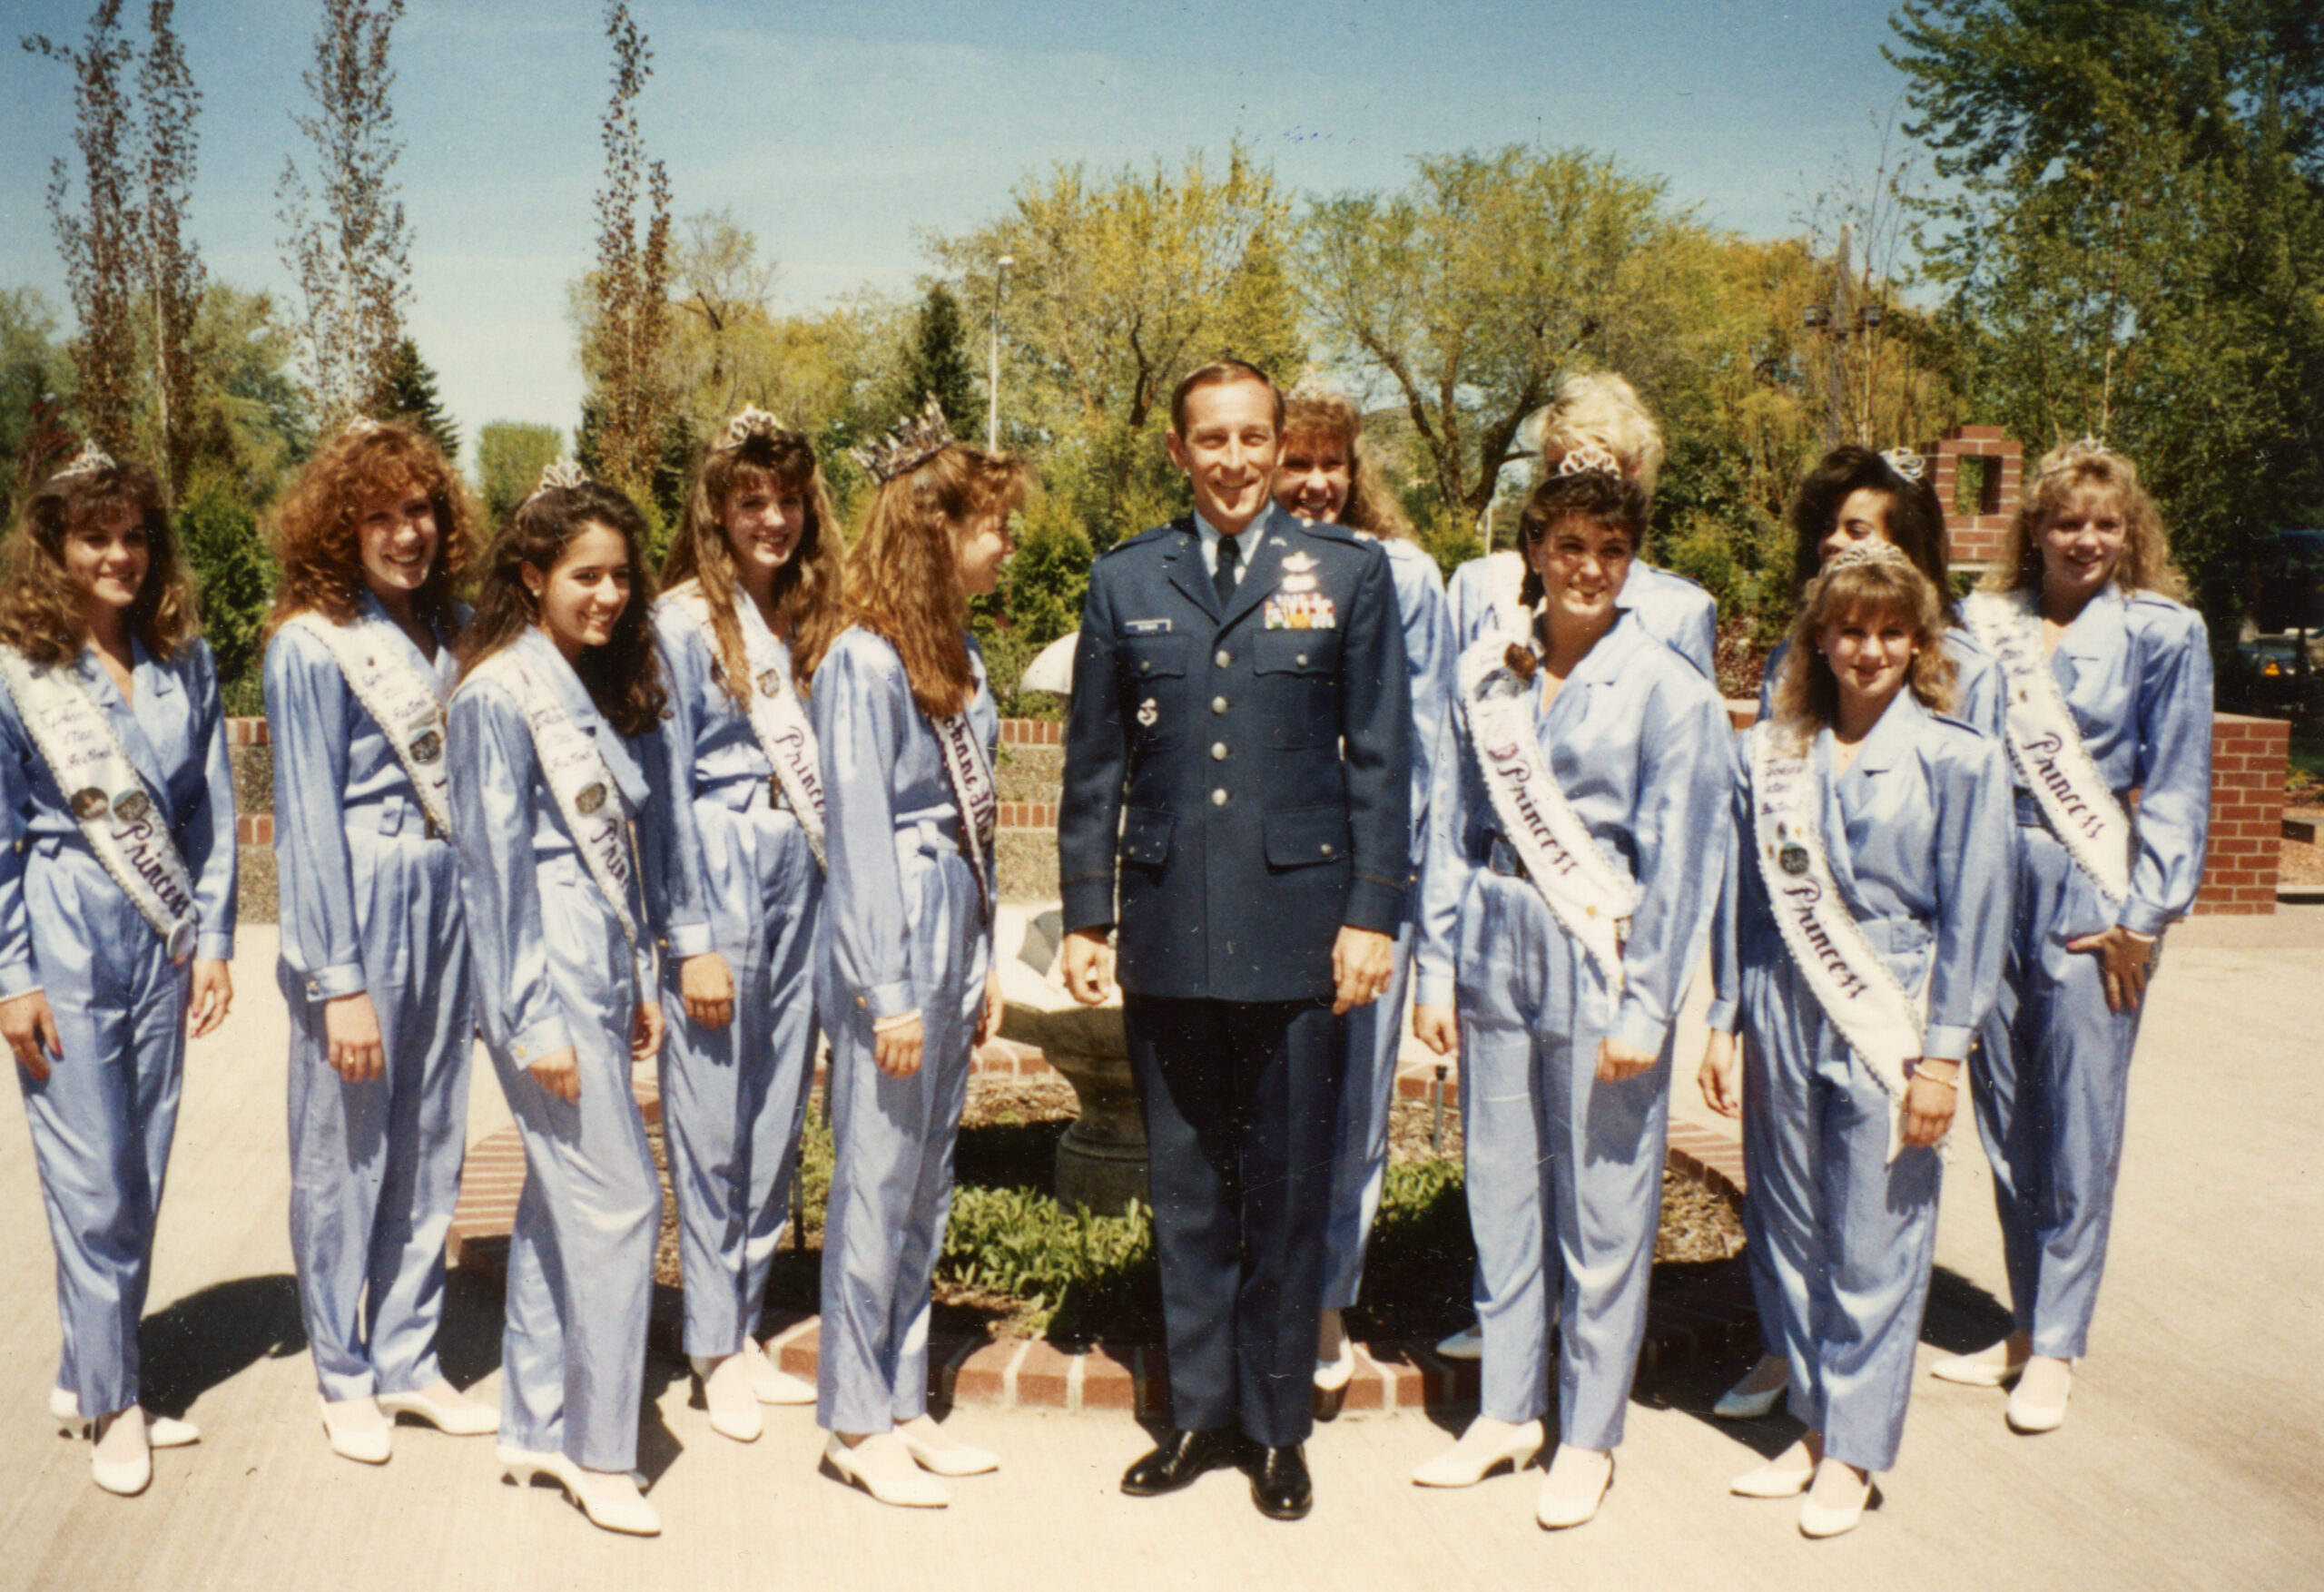 Colonel Arnie Weinman poses with Lilac royalty at Fairchild Air Force Base in 1990.